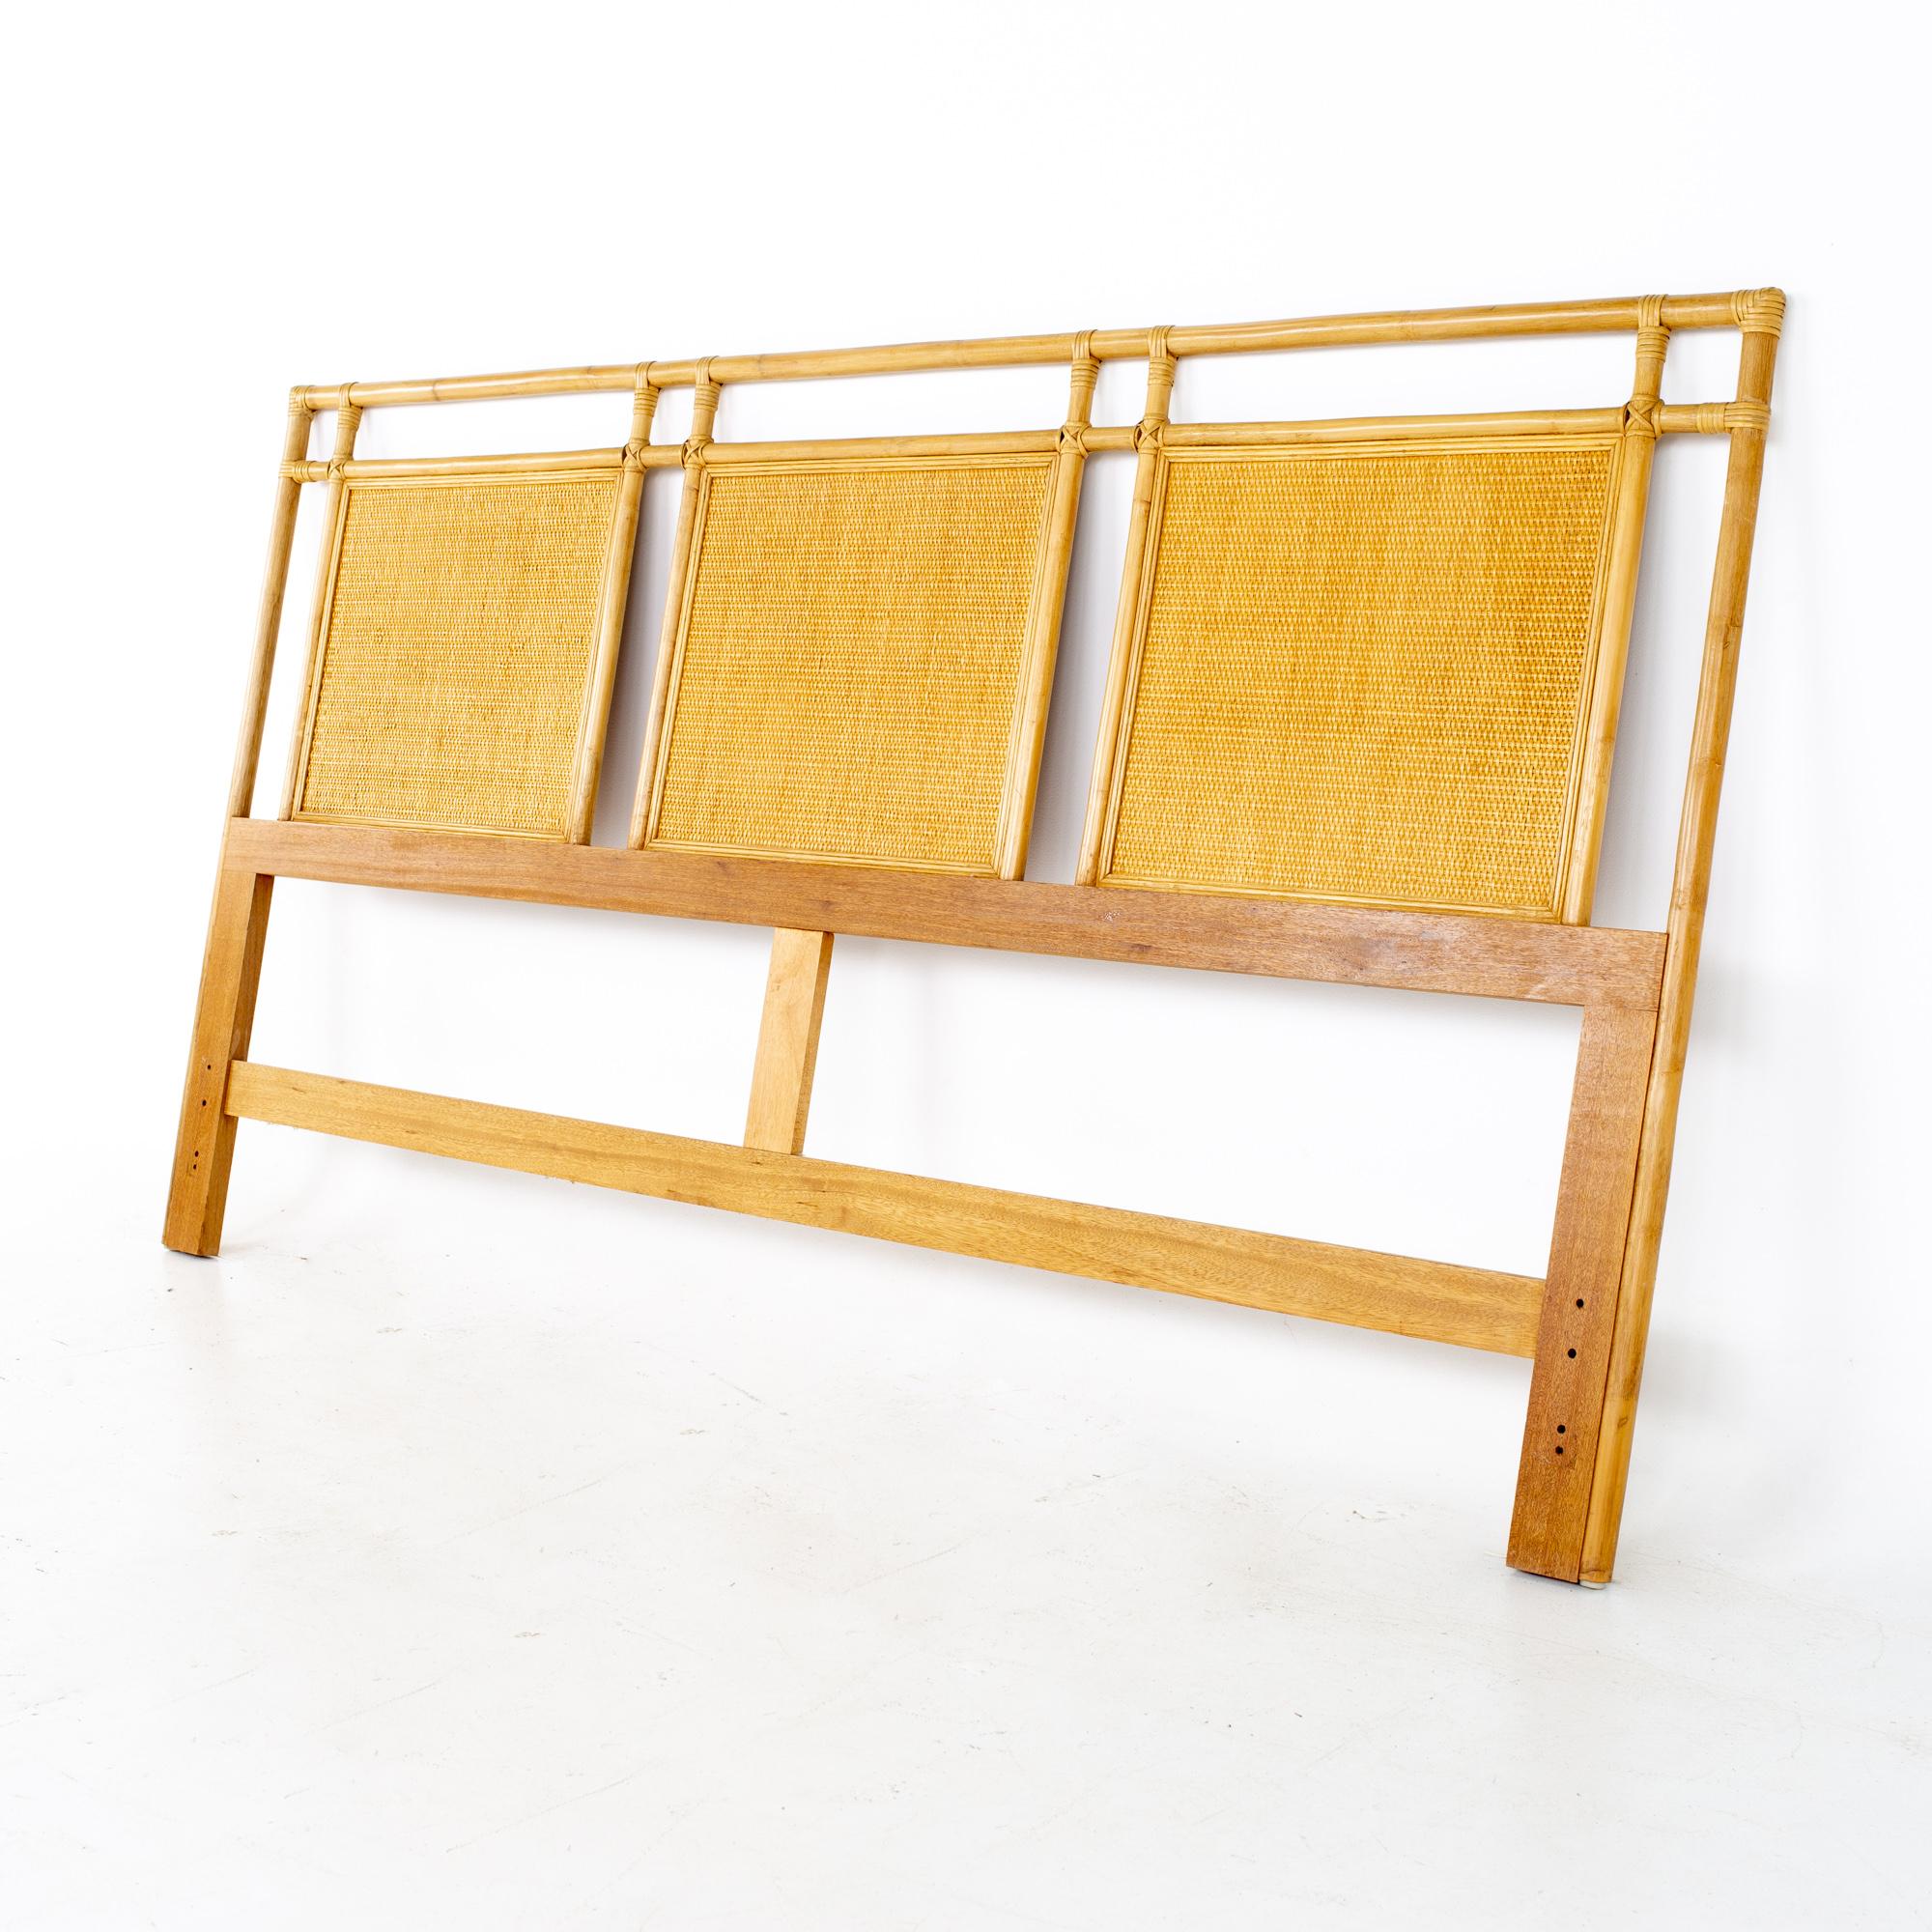 McGuire style mid century bamboo and rattan blonde king headboard
Headboard measures: 80.75 wide x 2 deep x 45 inches high

All pieces of furniture can be had in what we call restored vintage condition. That means the piece is restored upon